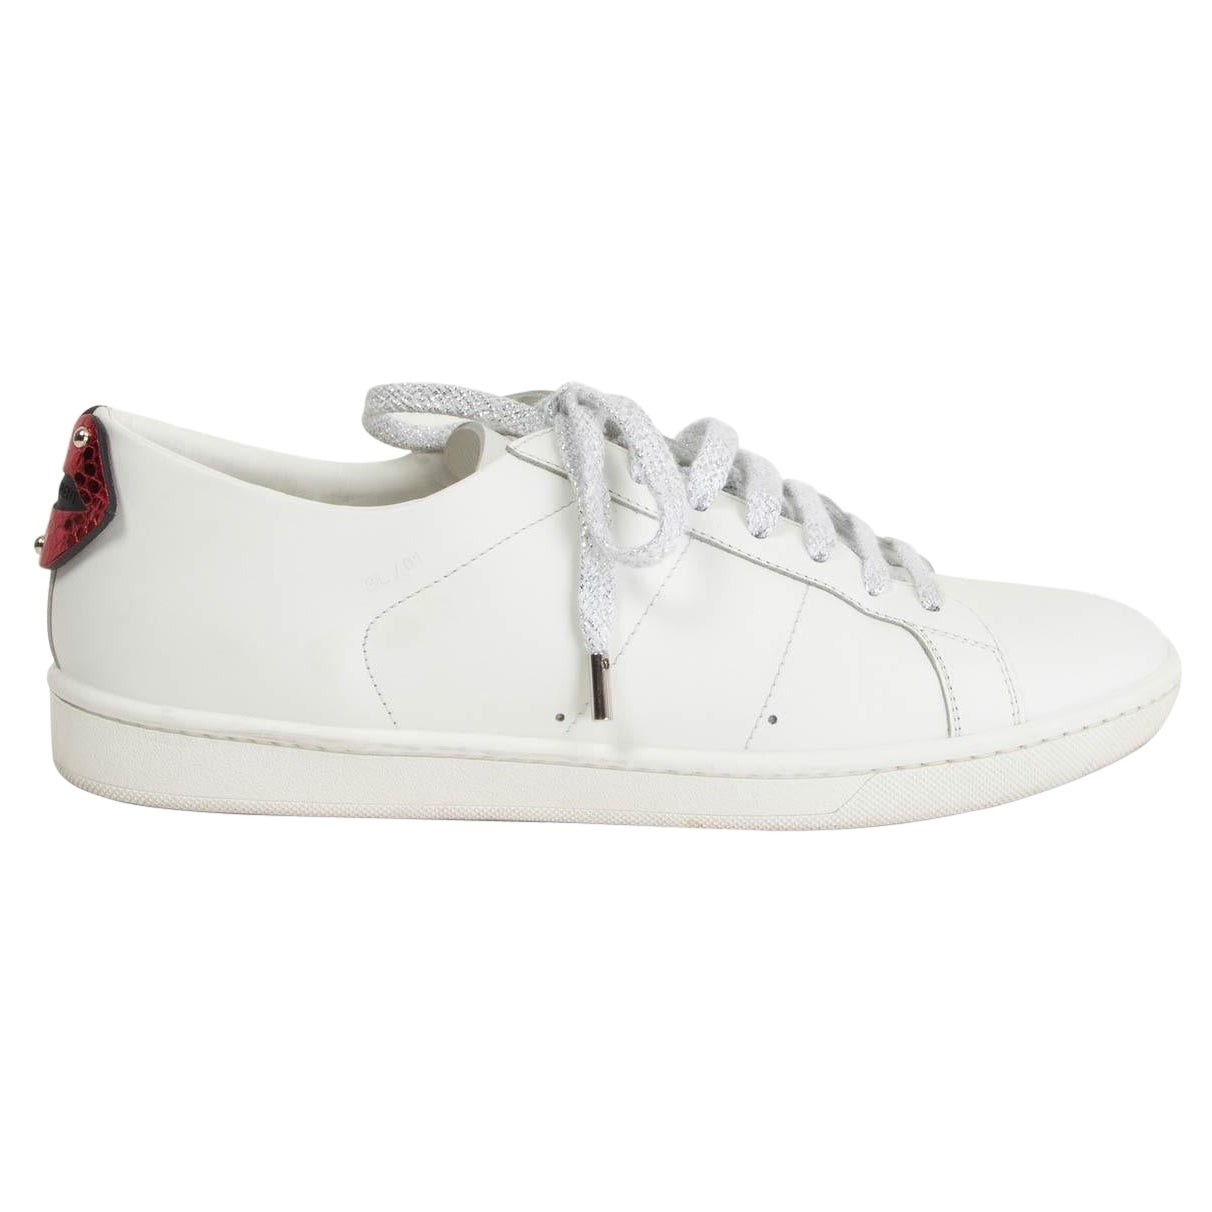 SAINT LAURENT white leather LIPS CLASSIC COURT Sneakers Shoes 39.5